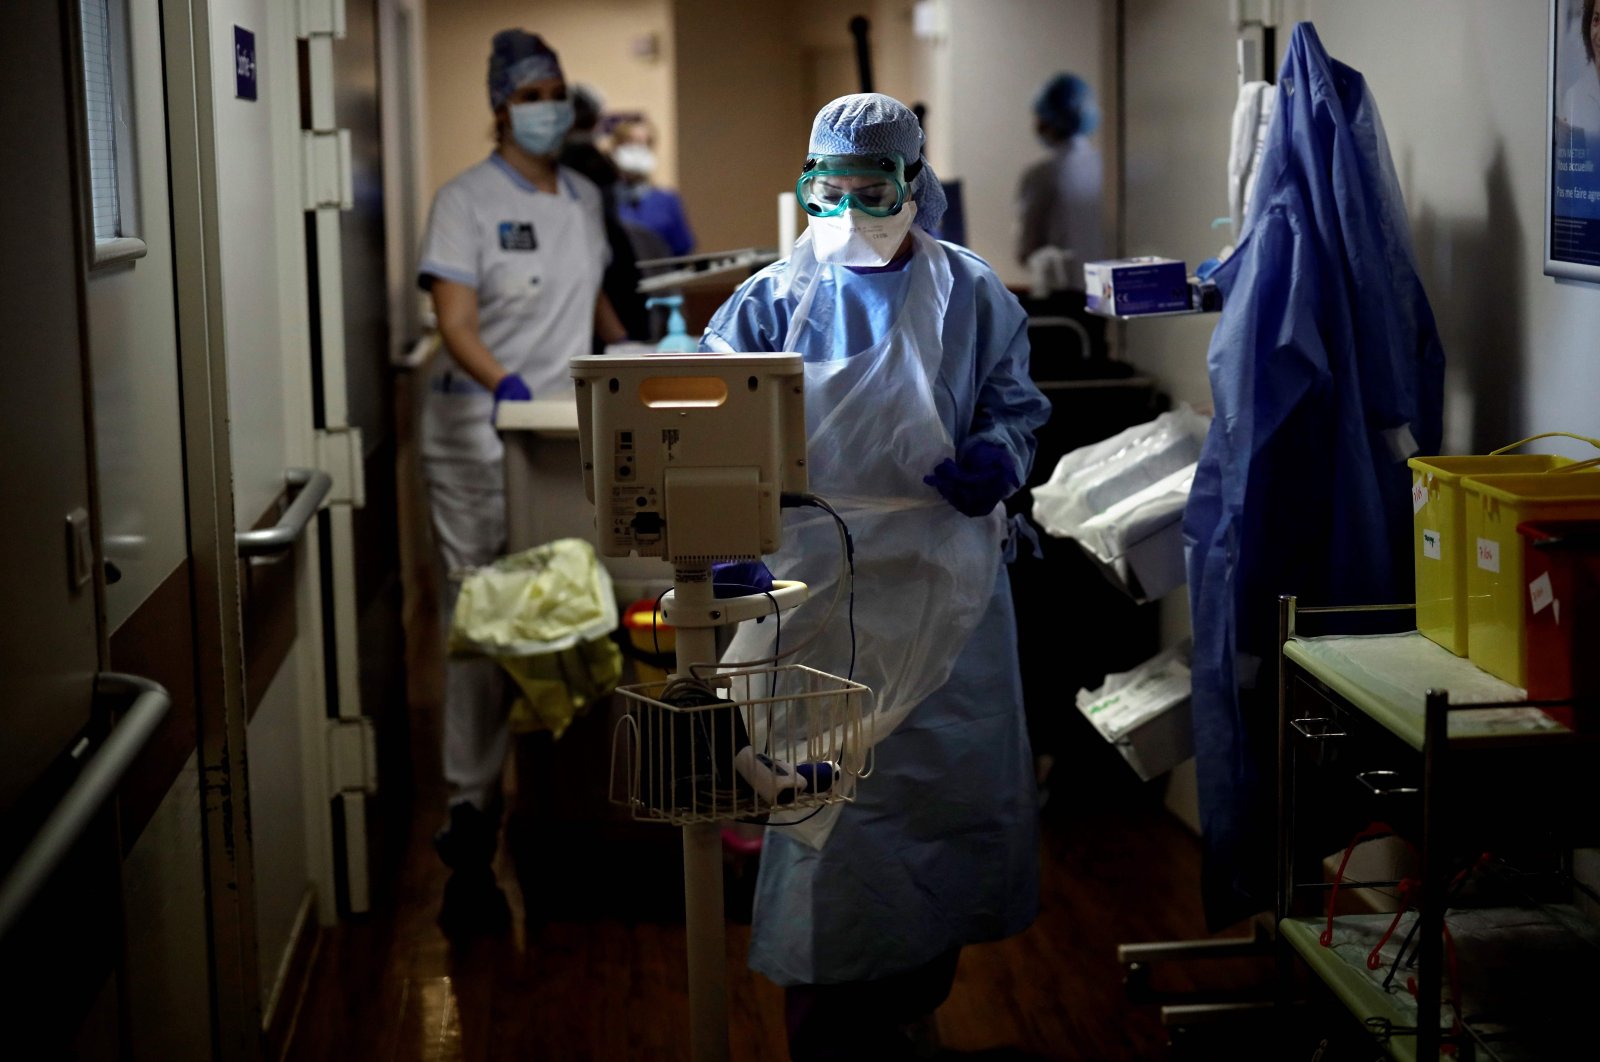 Nurses tend to patients infected with COVID-19 at the intensive care unit of Peupliers Hospital in Paris, France, April 7, 2020. (AFP Photo)